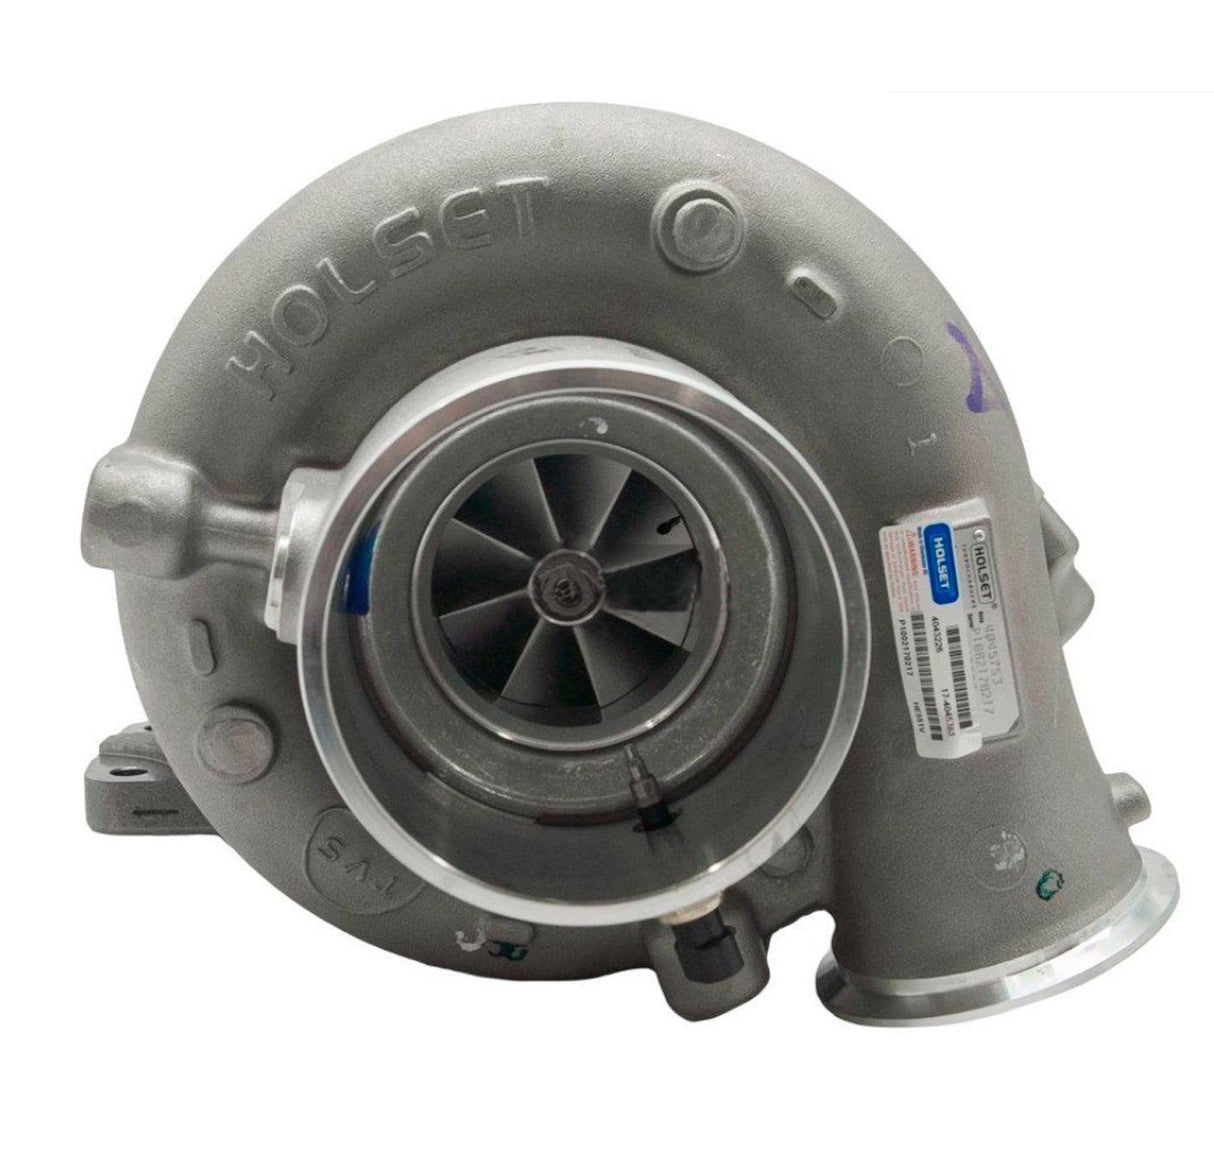 4035678 Genuine Cummins® Turbocharger With Actuator He551V For Isx.